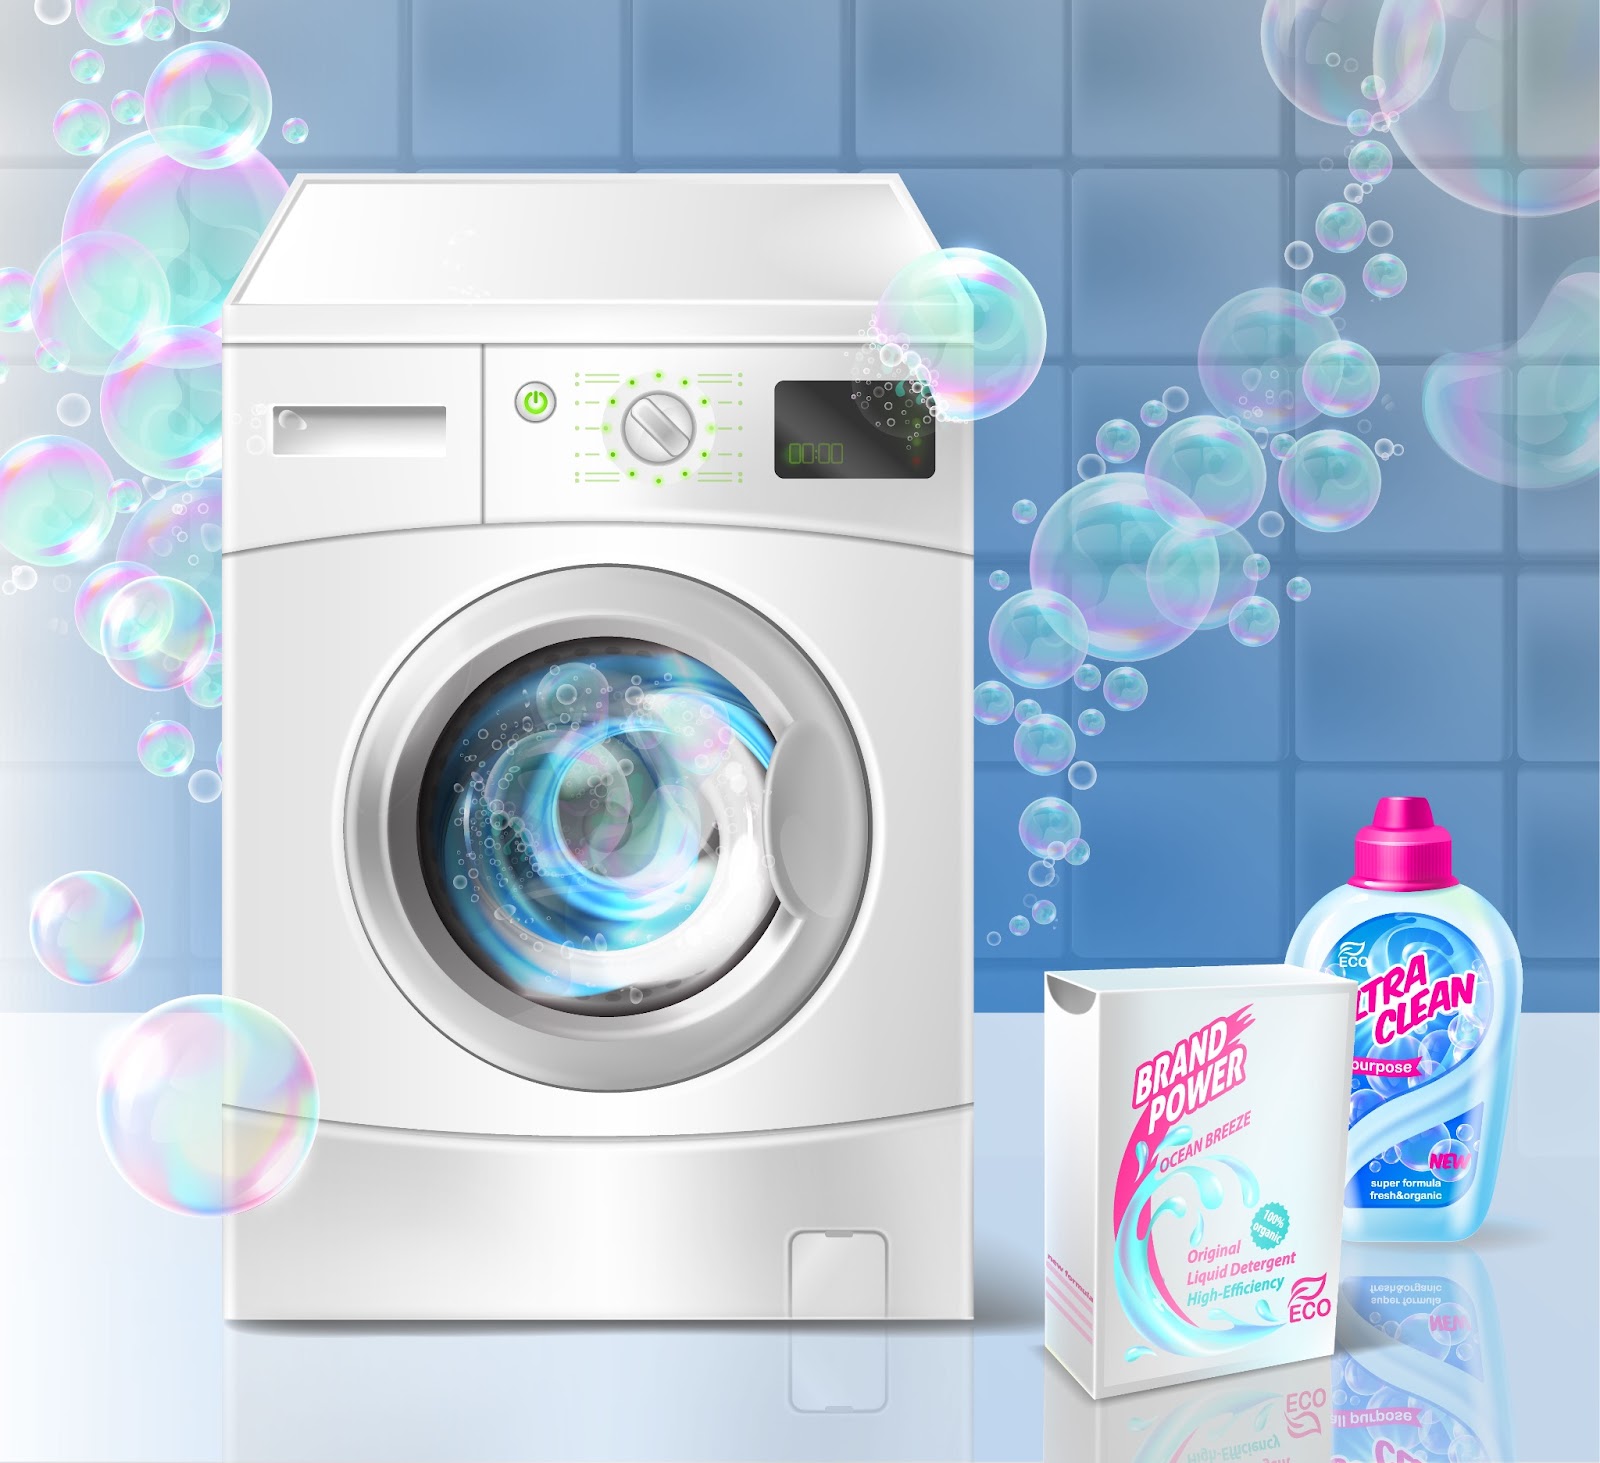 From load washing machine, liquid detergent for laundry, and soap bubbles for effective cleaning 